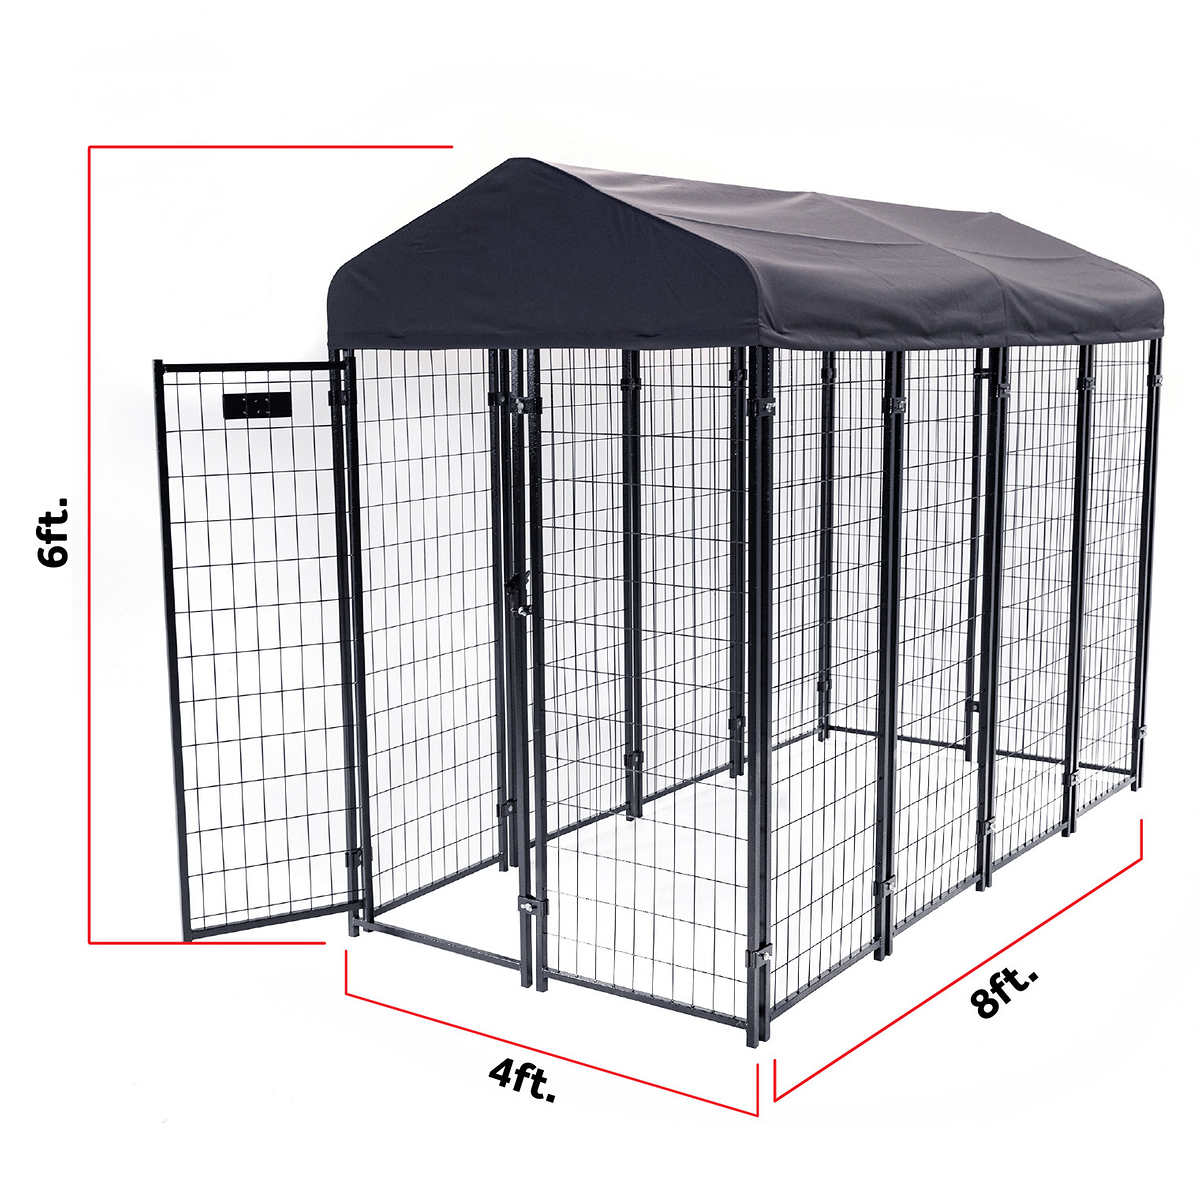 NEW - Costco - Lucky Dog STAY Series Villa Dog Kennel 4'x8' with Privacy Screen - Retail $499